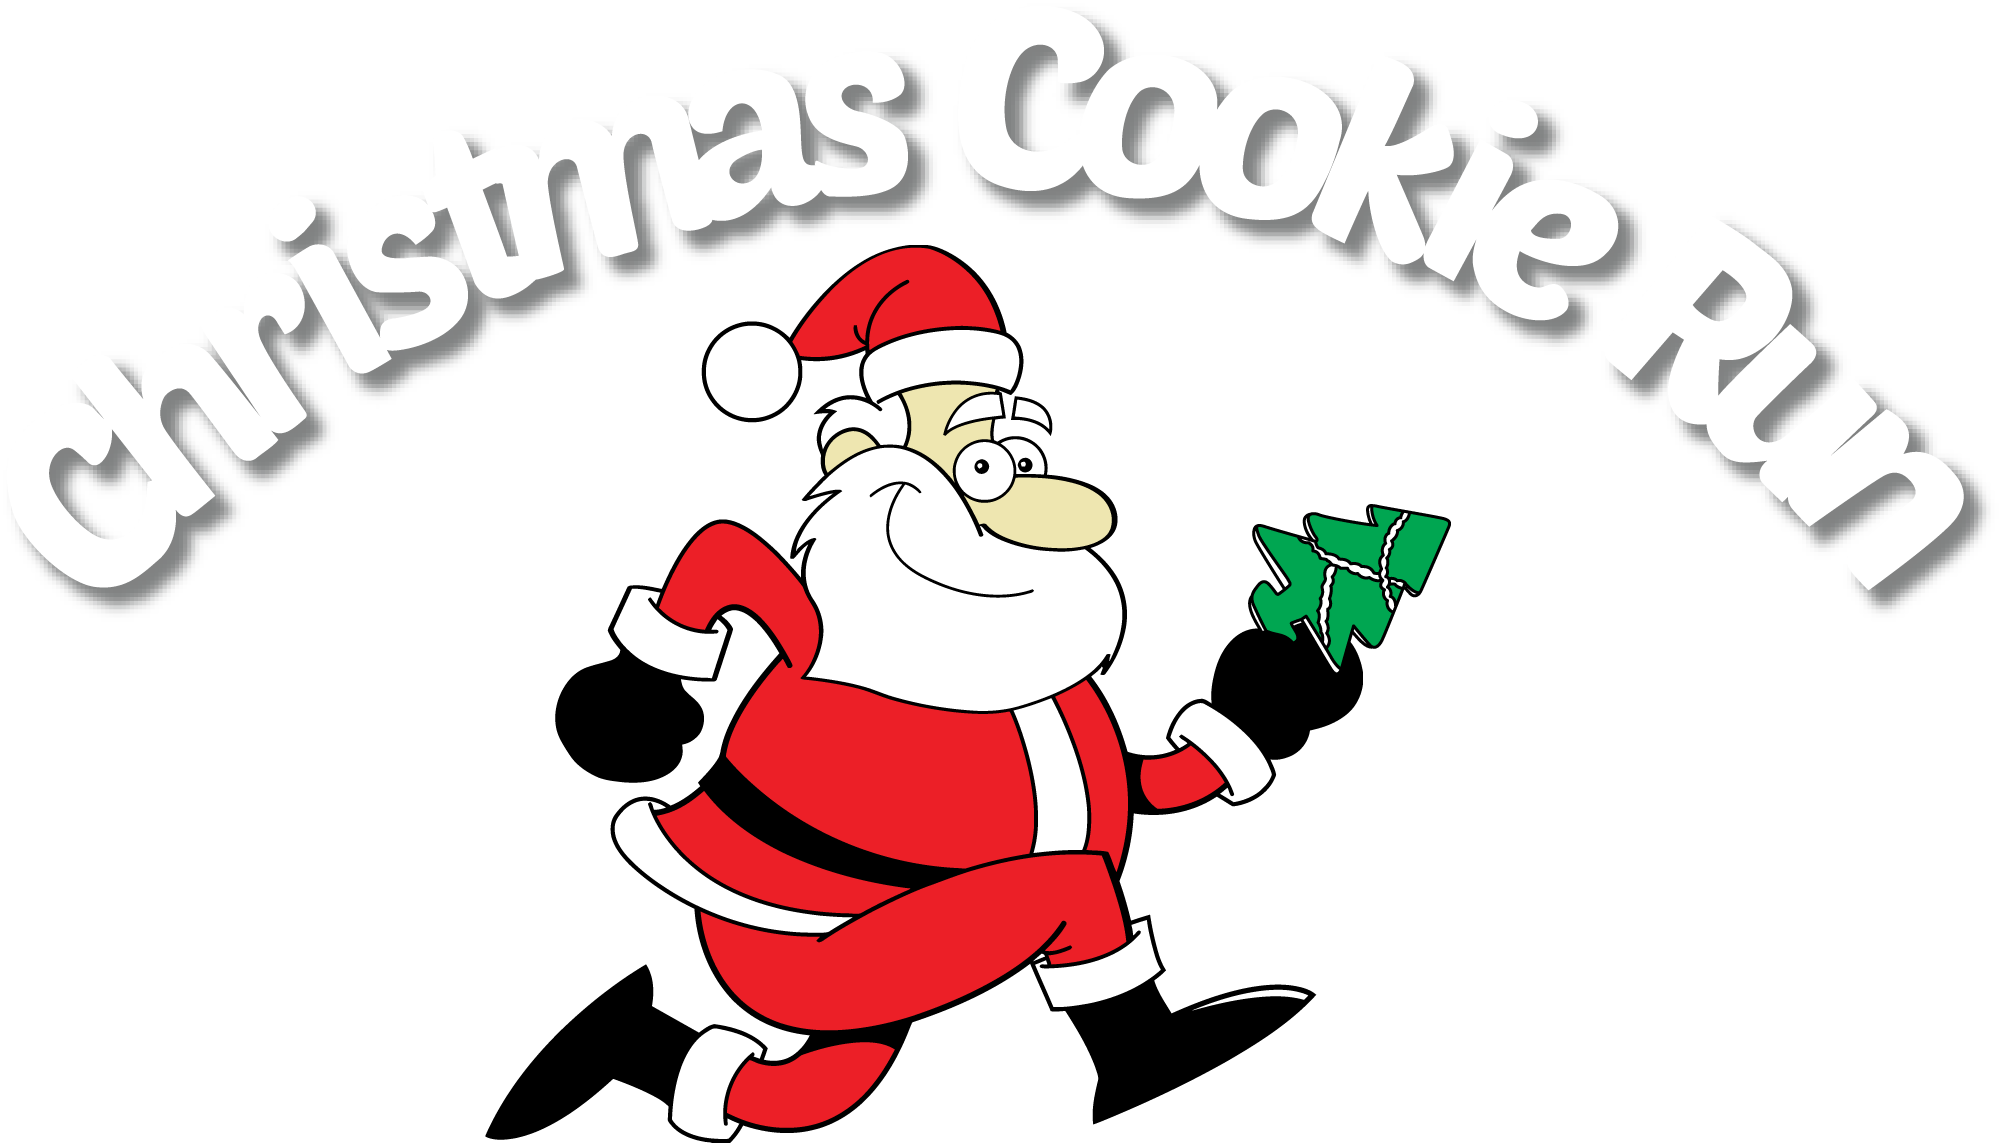 Christmas cookie run orlando. Clipart walking jog in place